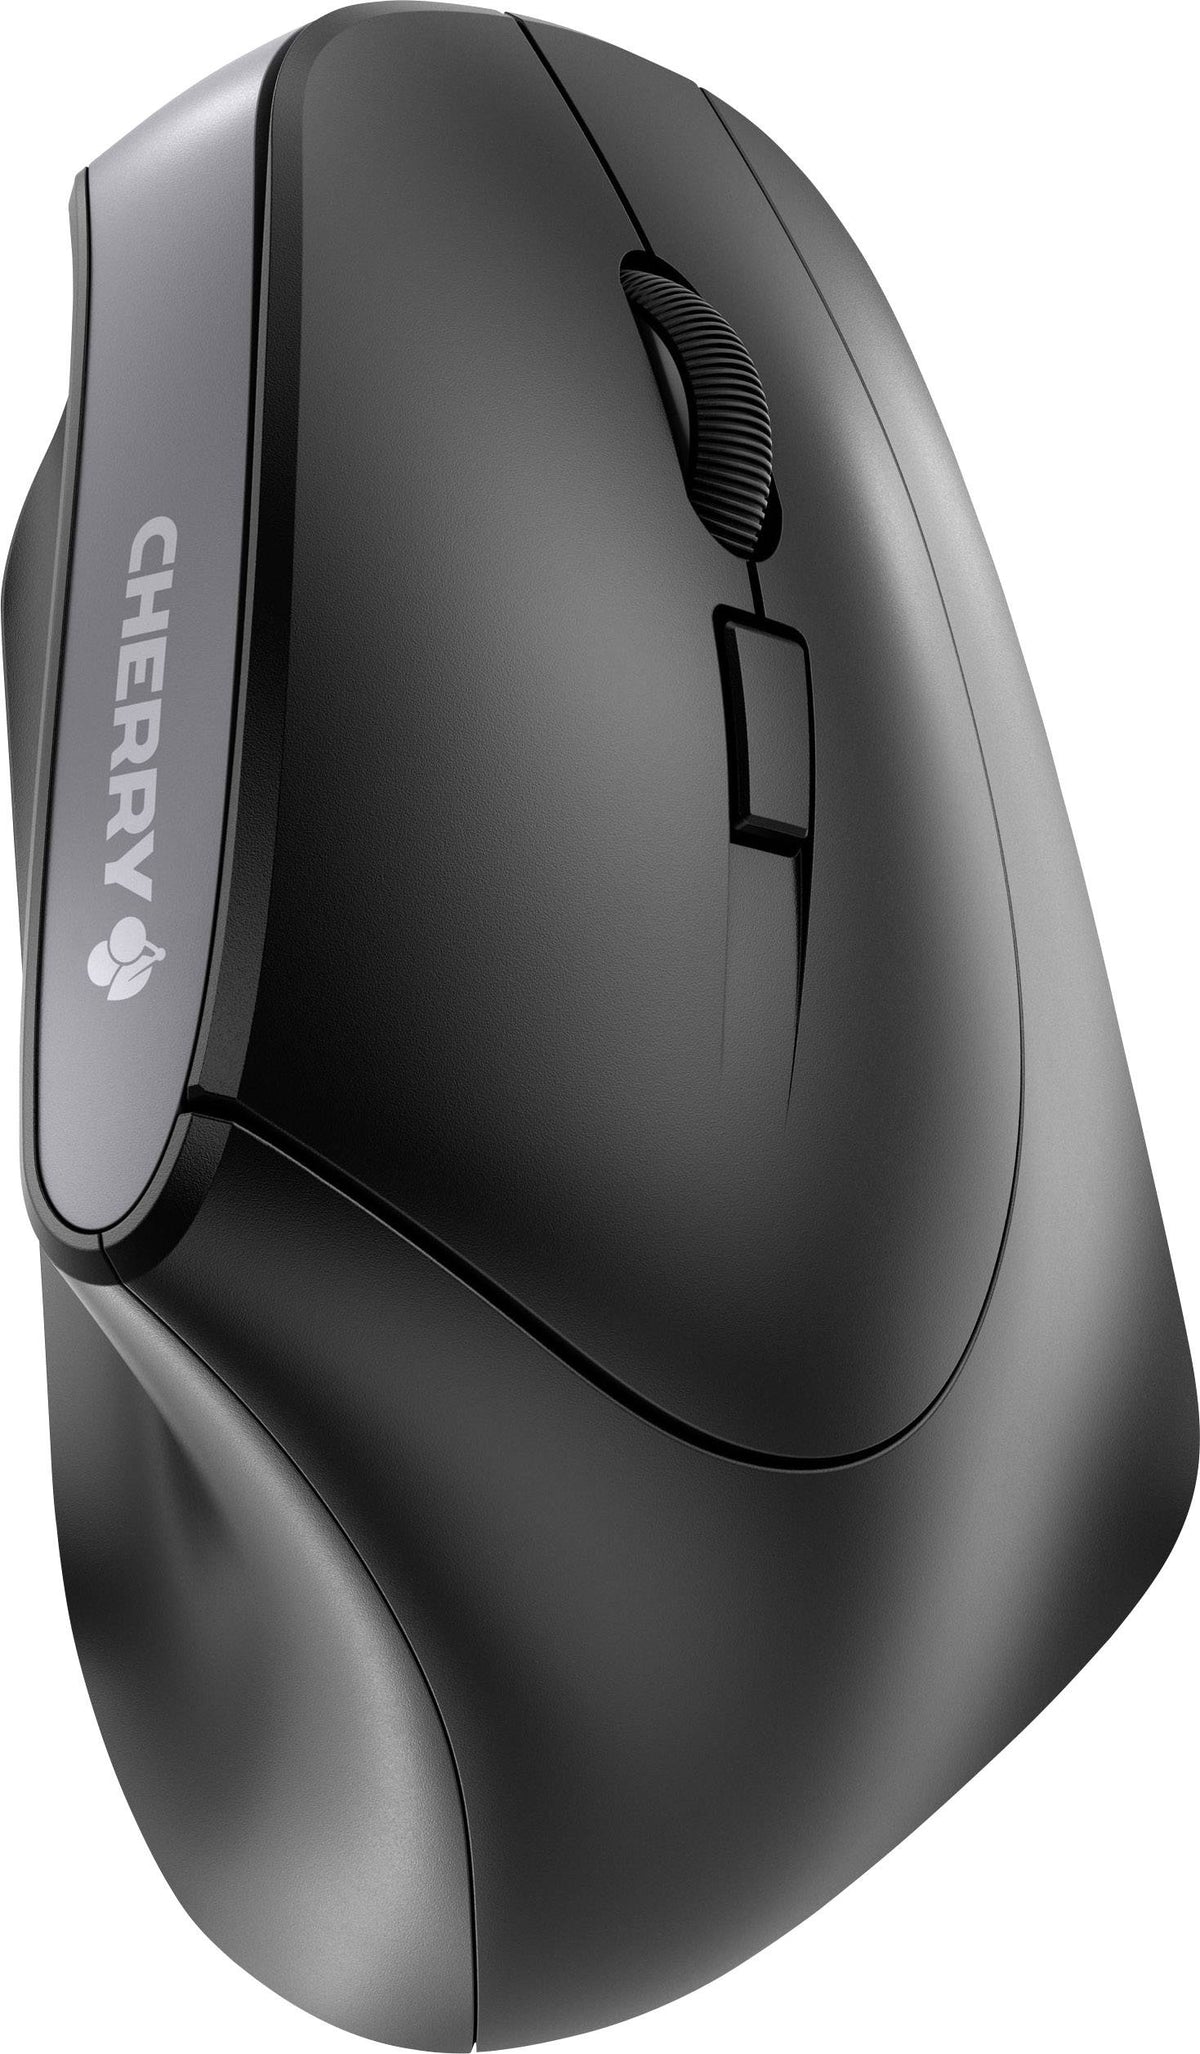 CHERRY MW 4500 - Upright mouse - ergonomic - right hand - optical - 6 buttons - wireless - 2.4 GHz - USB wireless receiver - black